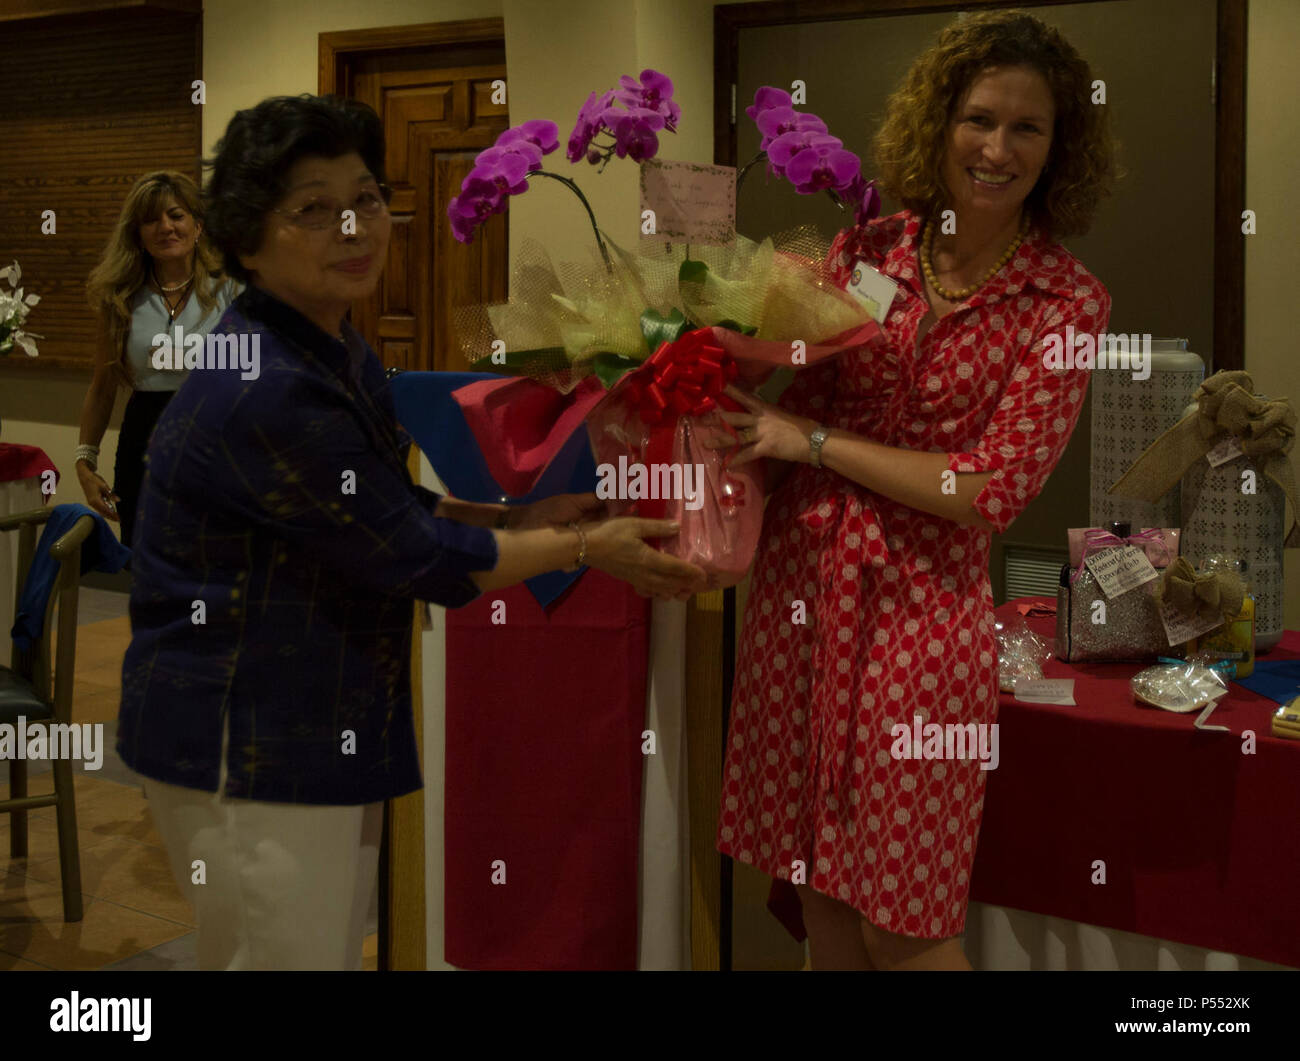 Kimiyo Taira, left,  gives a gift to Marlow Townes during the American Women’s Welfare Association’s Annual Friendship Social May 10 at Torii Station, Okinawa, Japan. Taira is of an organization for a single parent program in Okinawa. Townes is the president of the AWWA and has been volunteering since 2014. Stock Photo